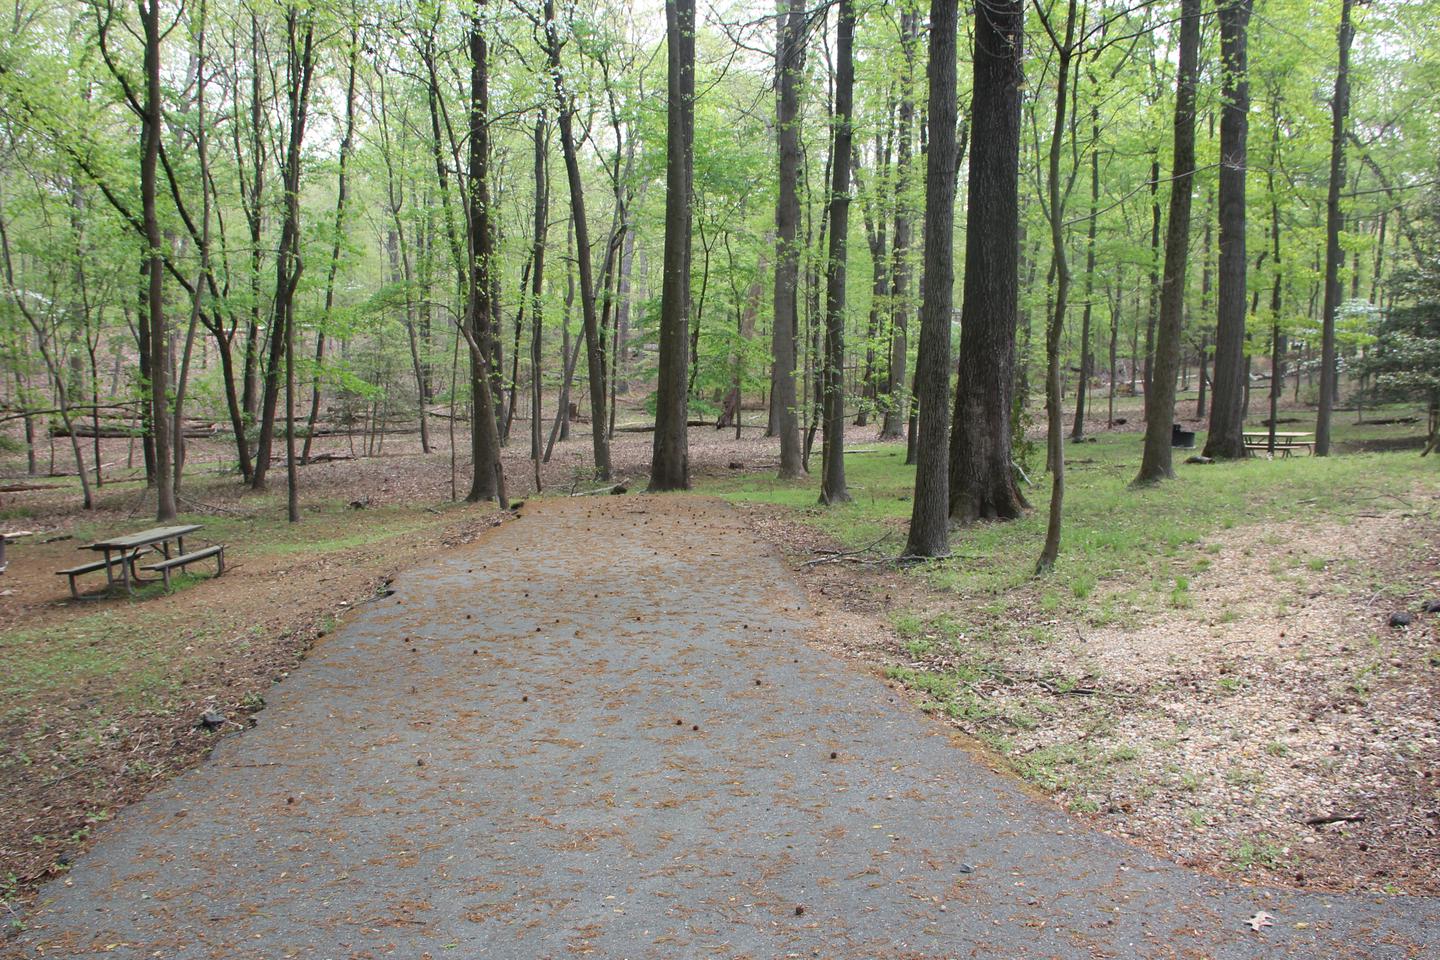 D 116  D Loop of the Greenbelt Park Md campgroundD 116  D Loop of the Greenbelt Park Maryland campground (former Site 119)